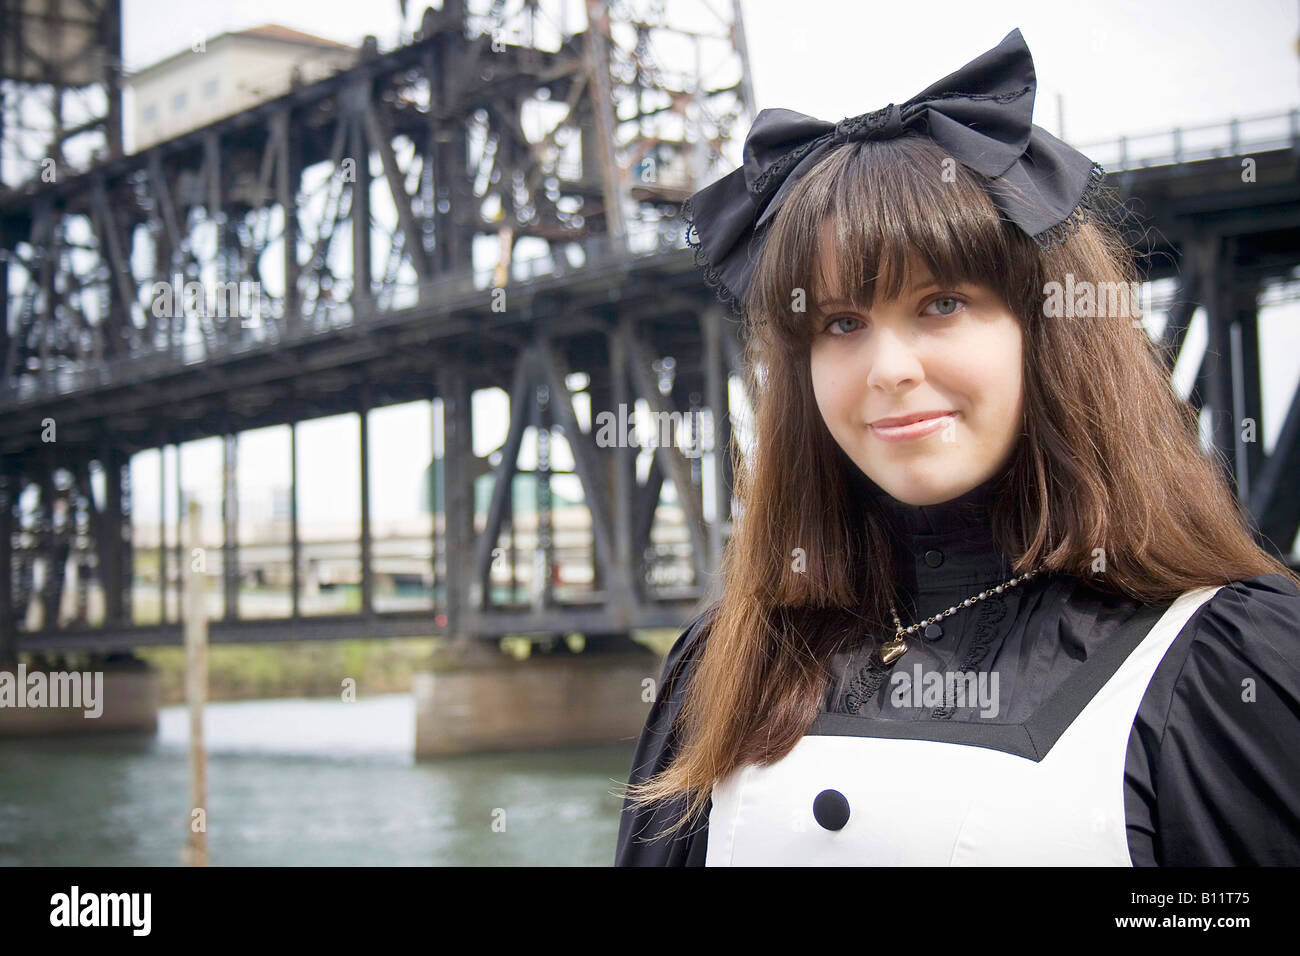 Young woman wearing Japanese lolita fashion standing in front of the Steel Bridge in Portland, Oregon USA Stock Photo